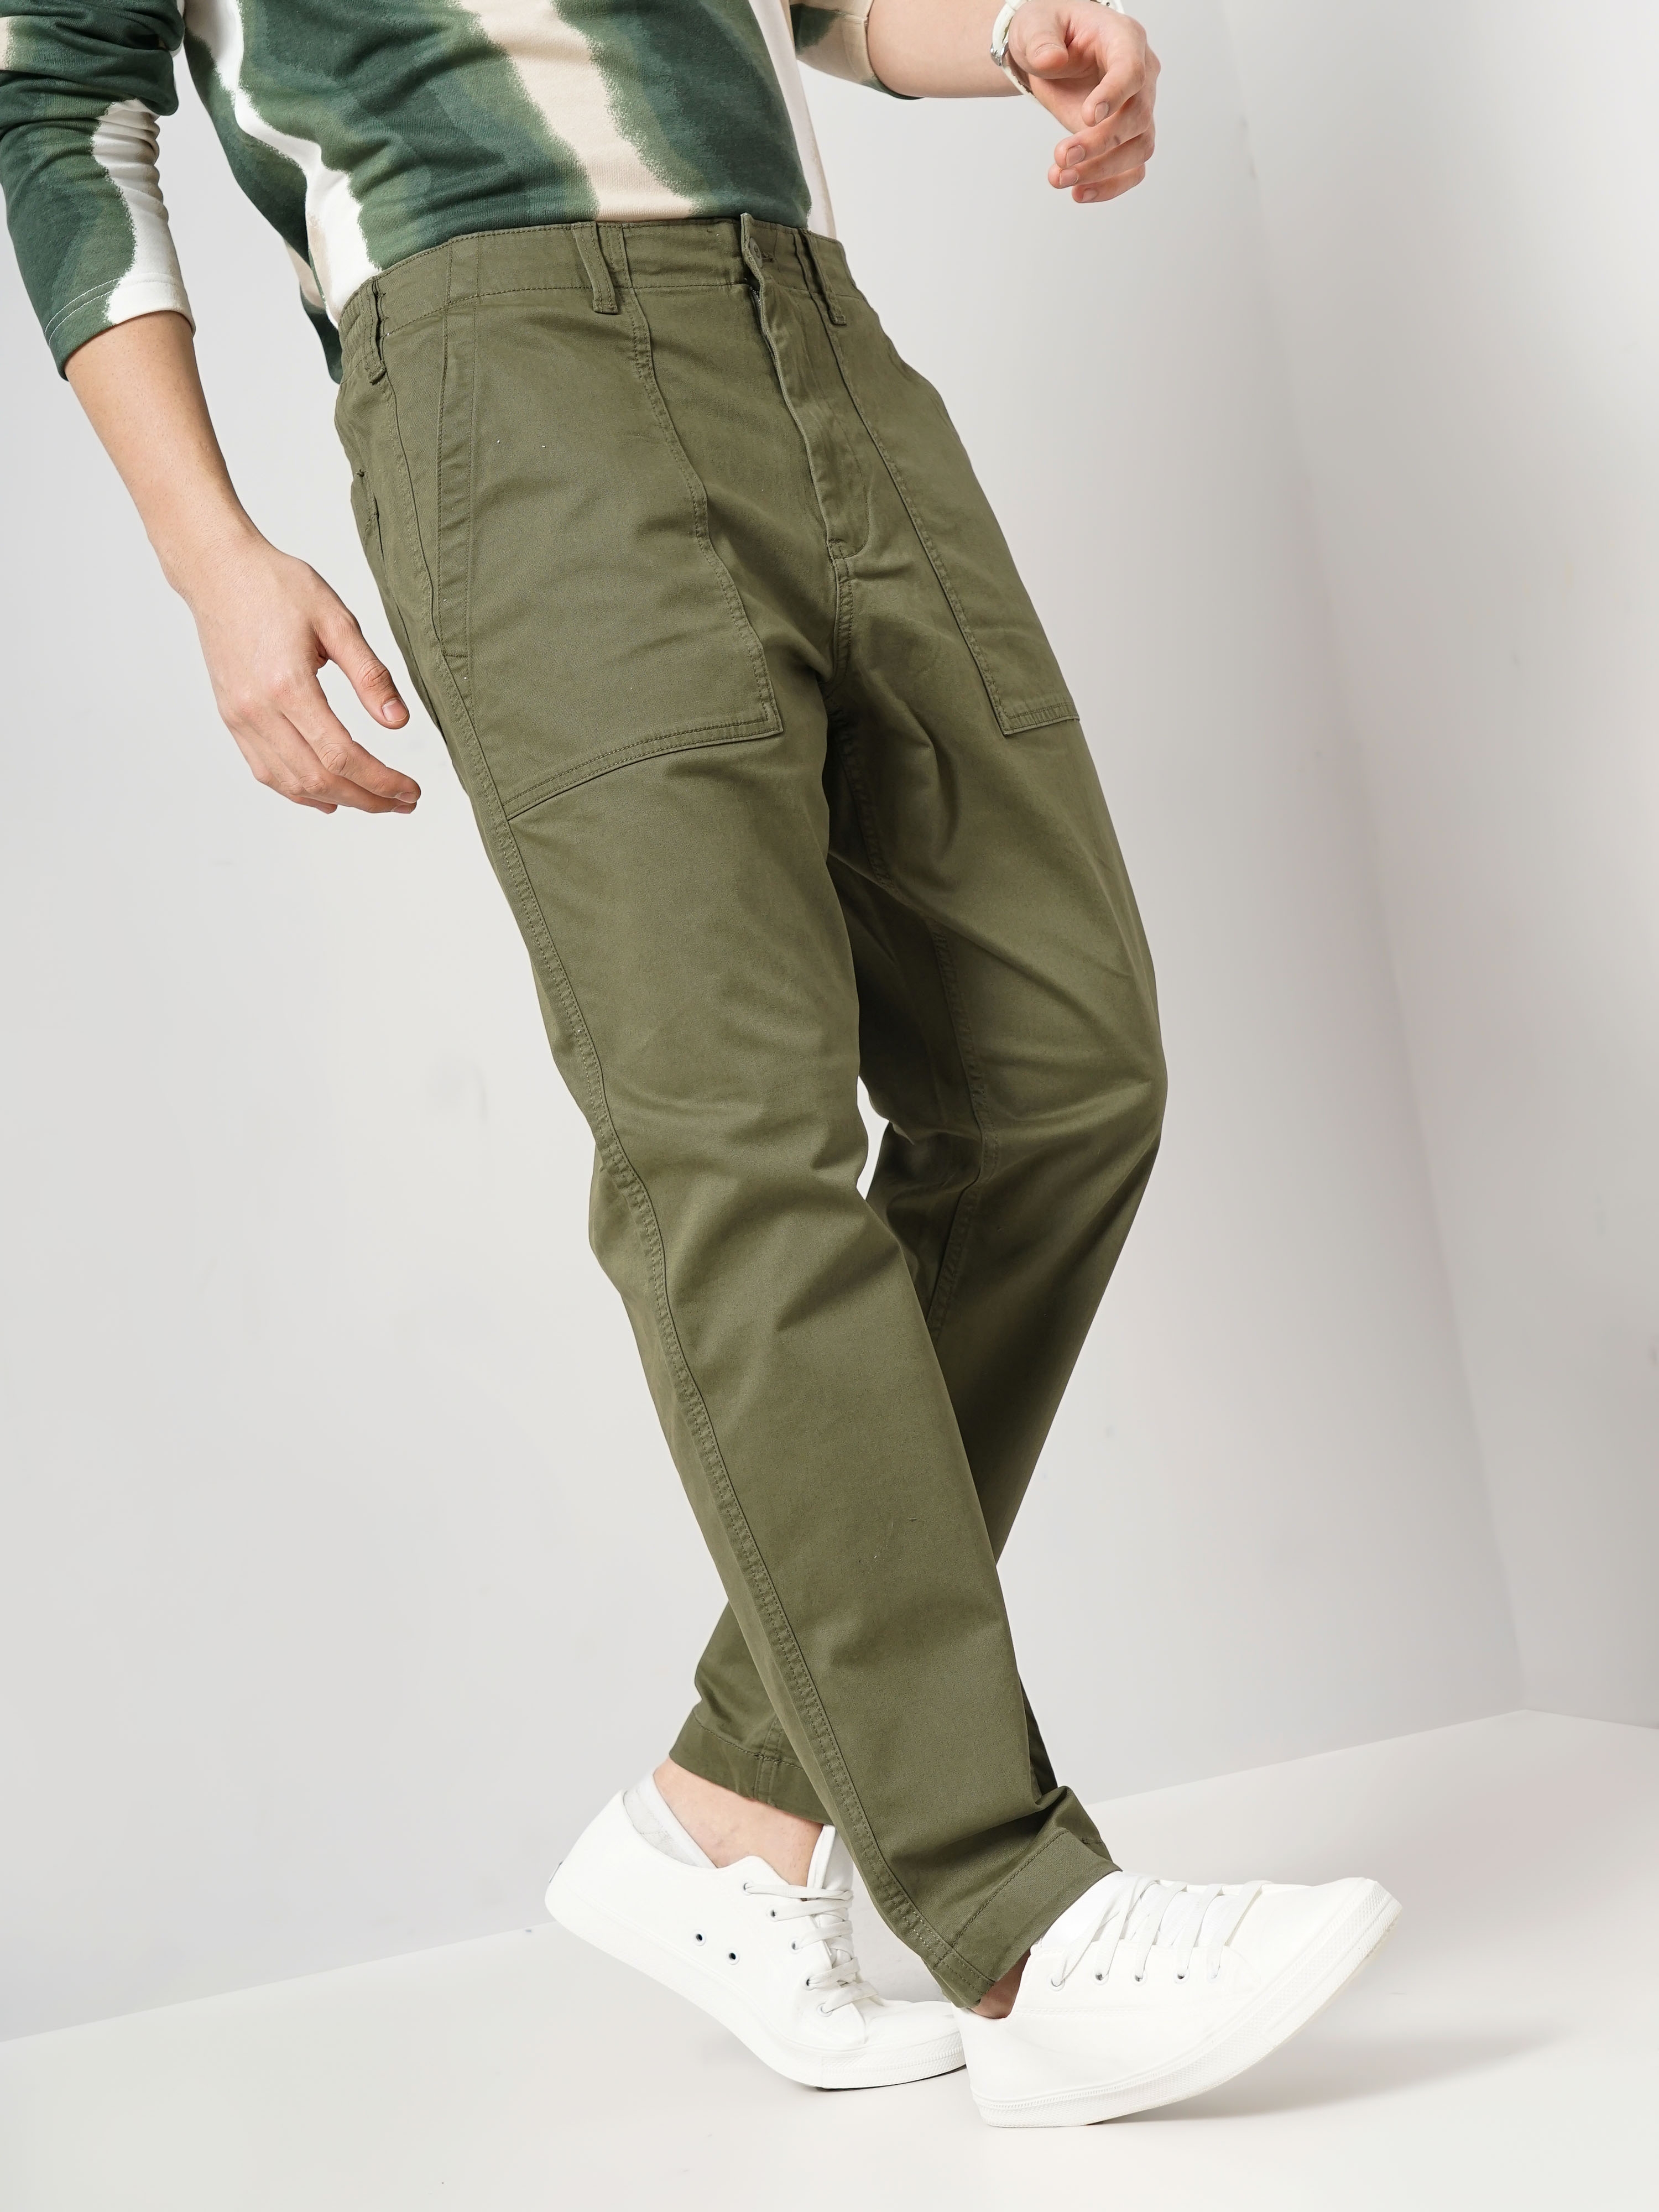 Men's Casual Loose Trousers With Elastic Waist